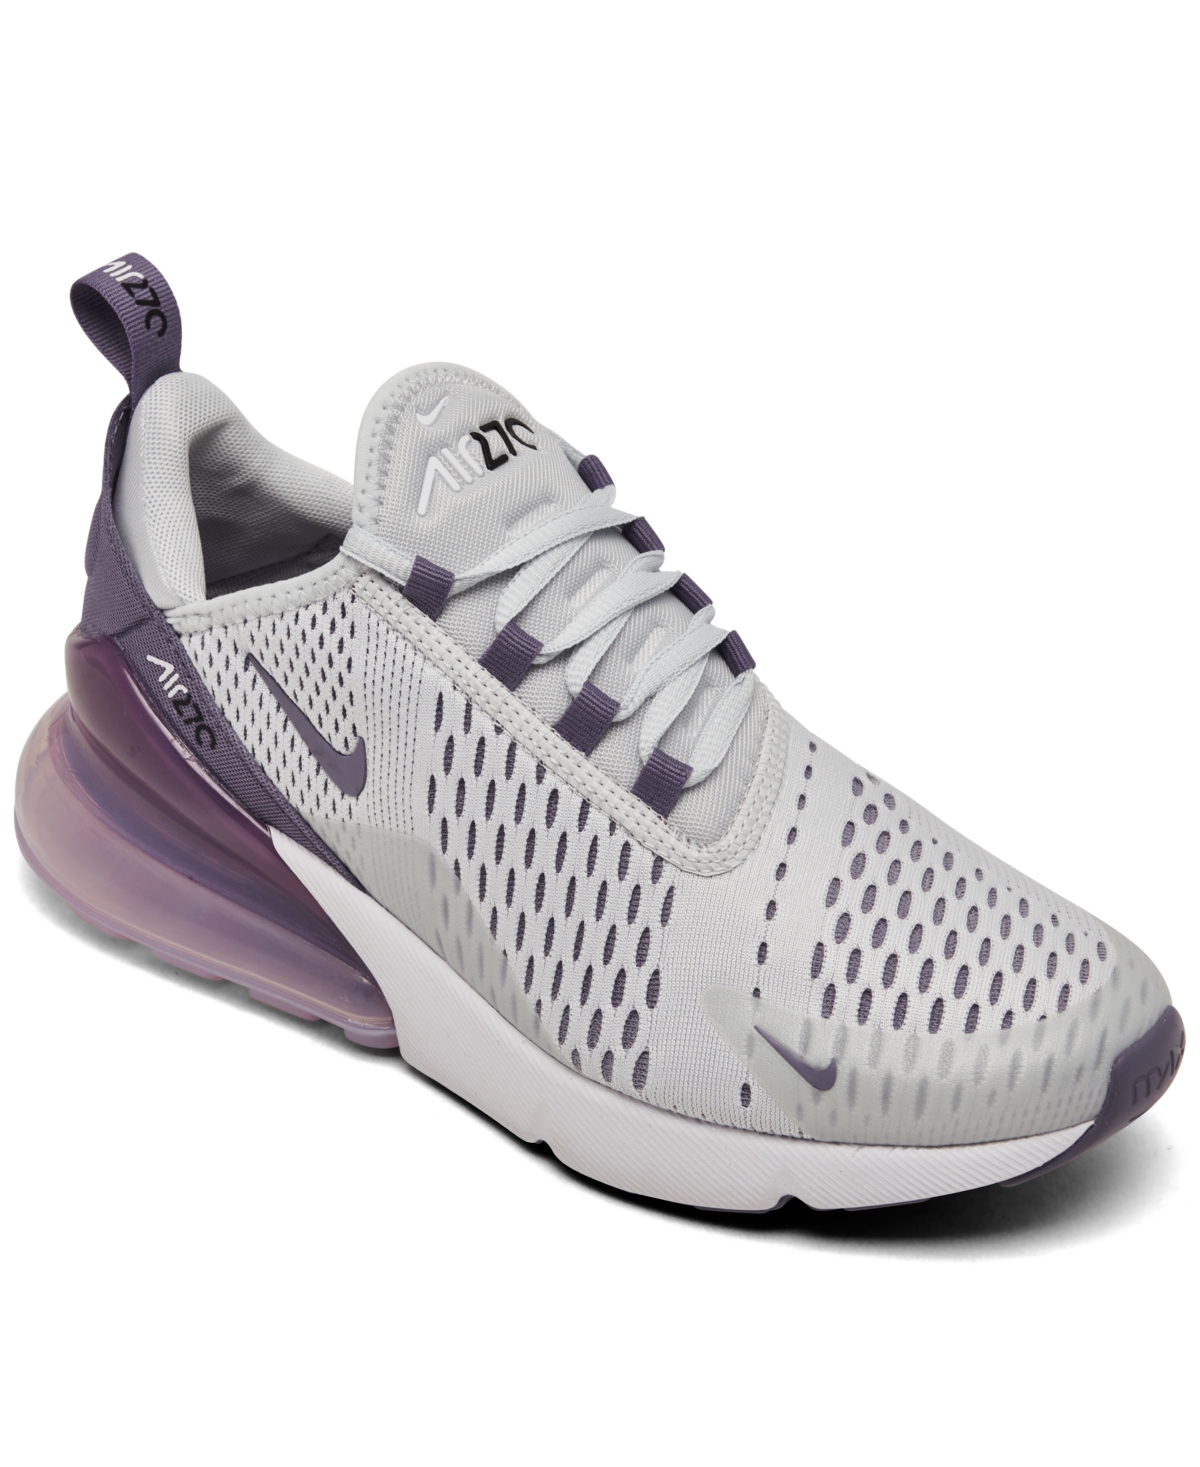 Women's Air Max 270 Casual Sneakers from Finish Line - Pure platinum/white/lilac